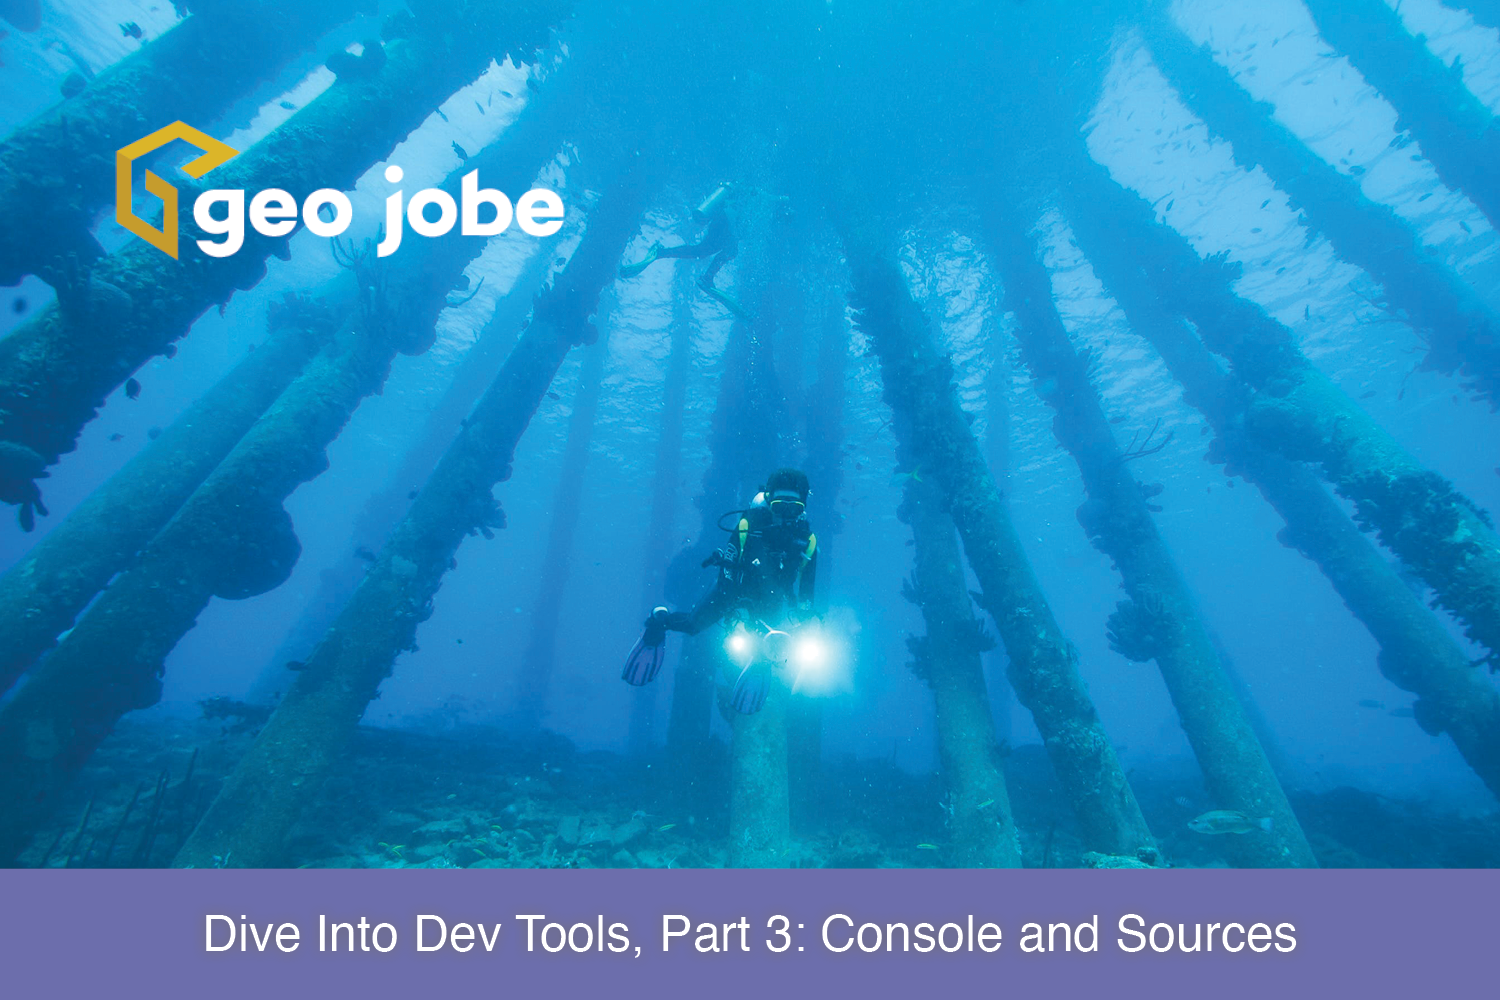 Dive Into Dev Tools, Part 3: Console and Sources